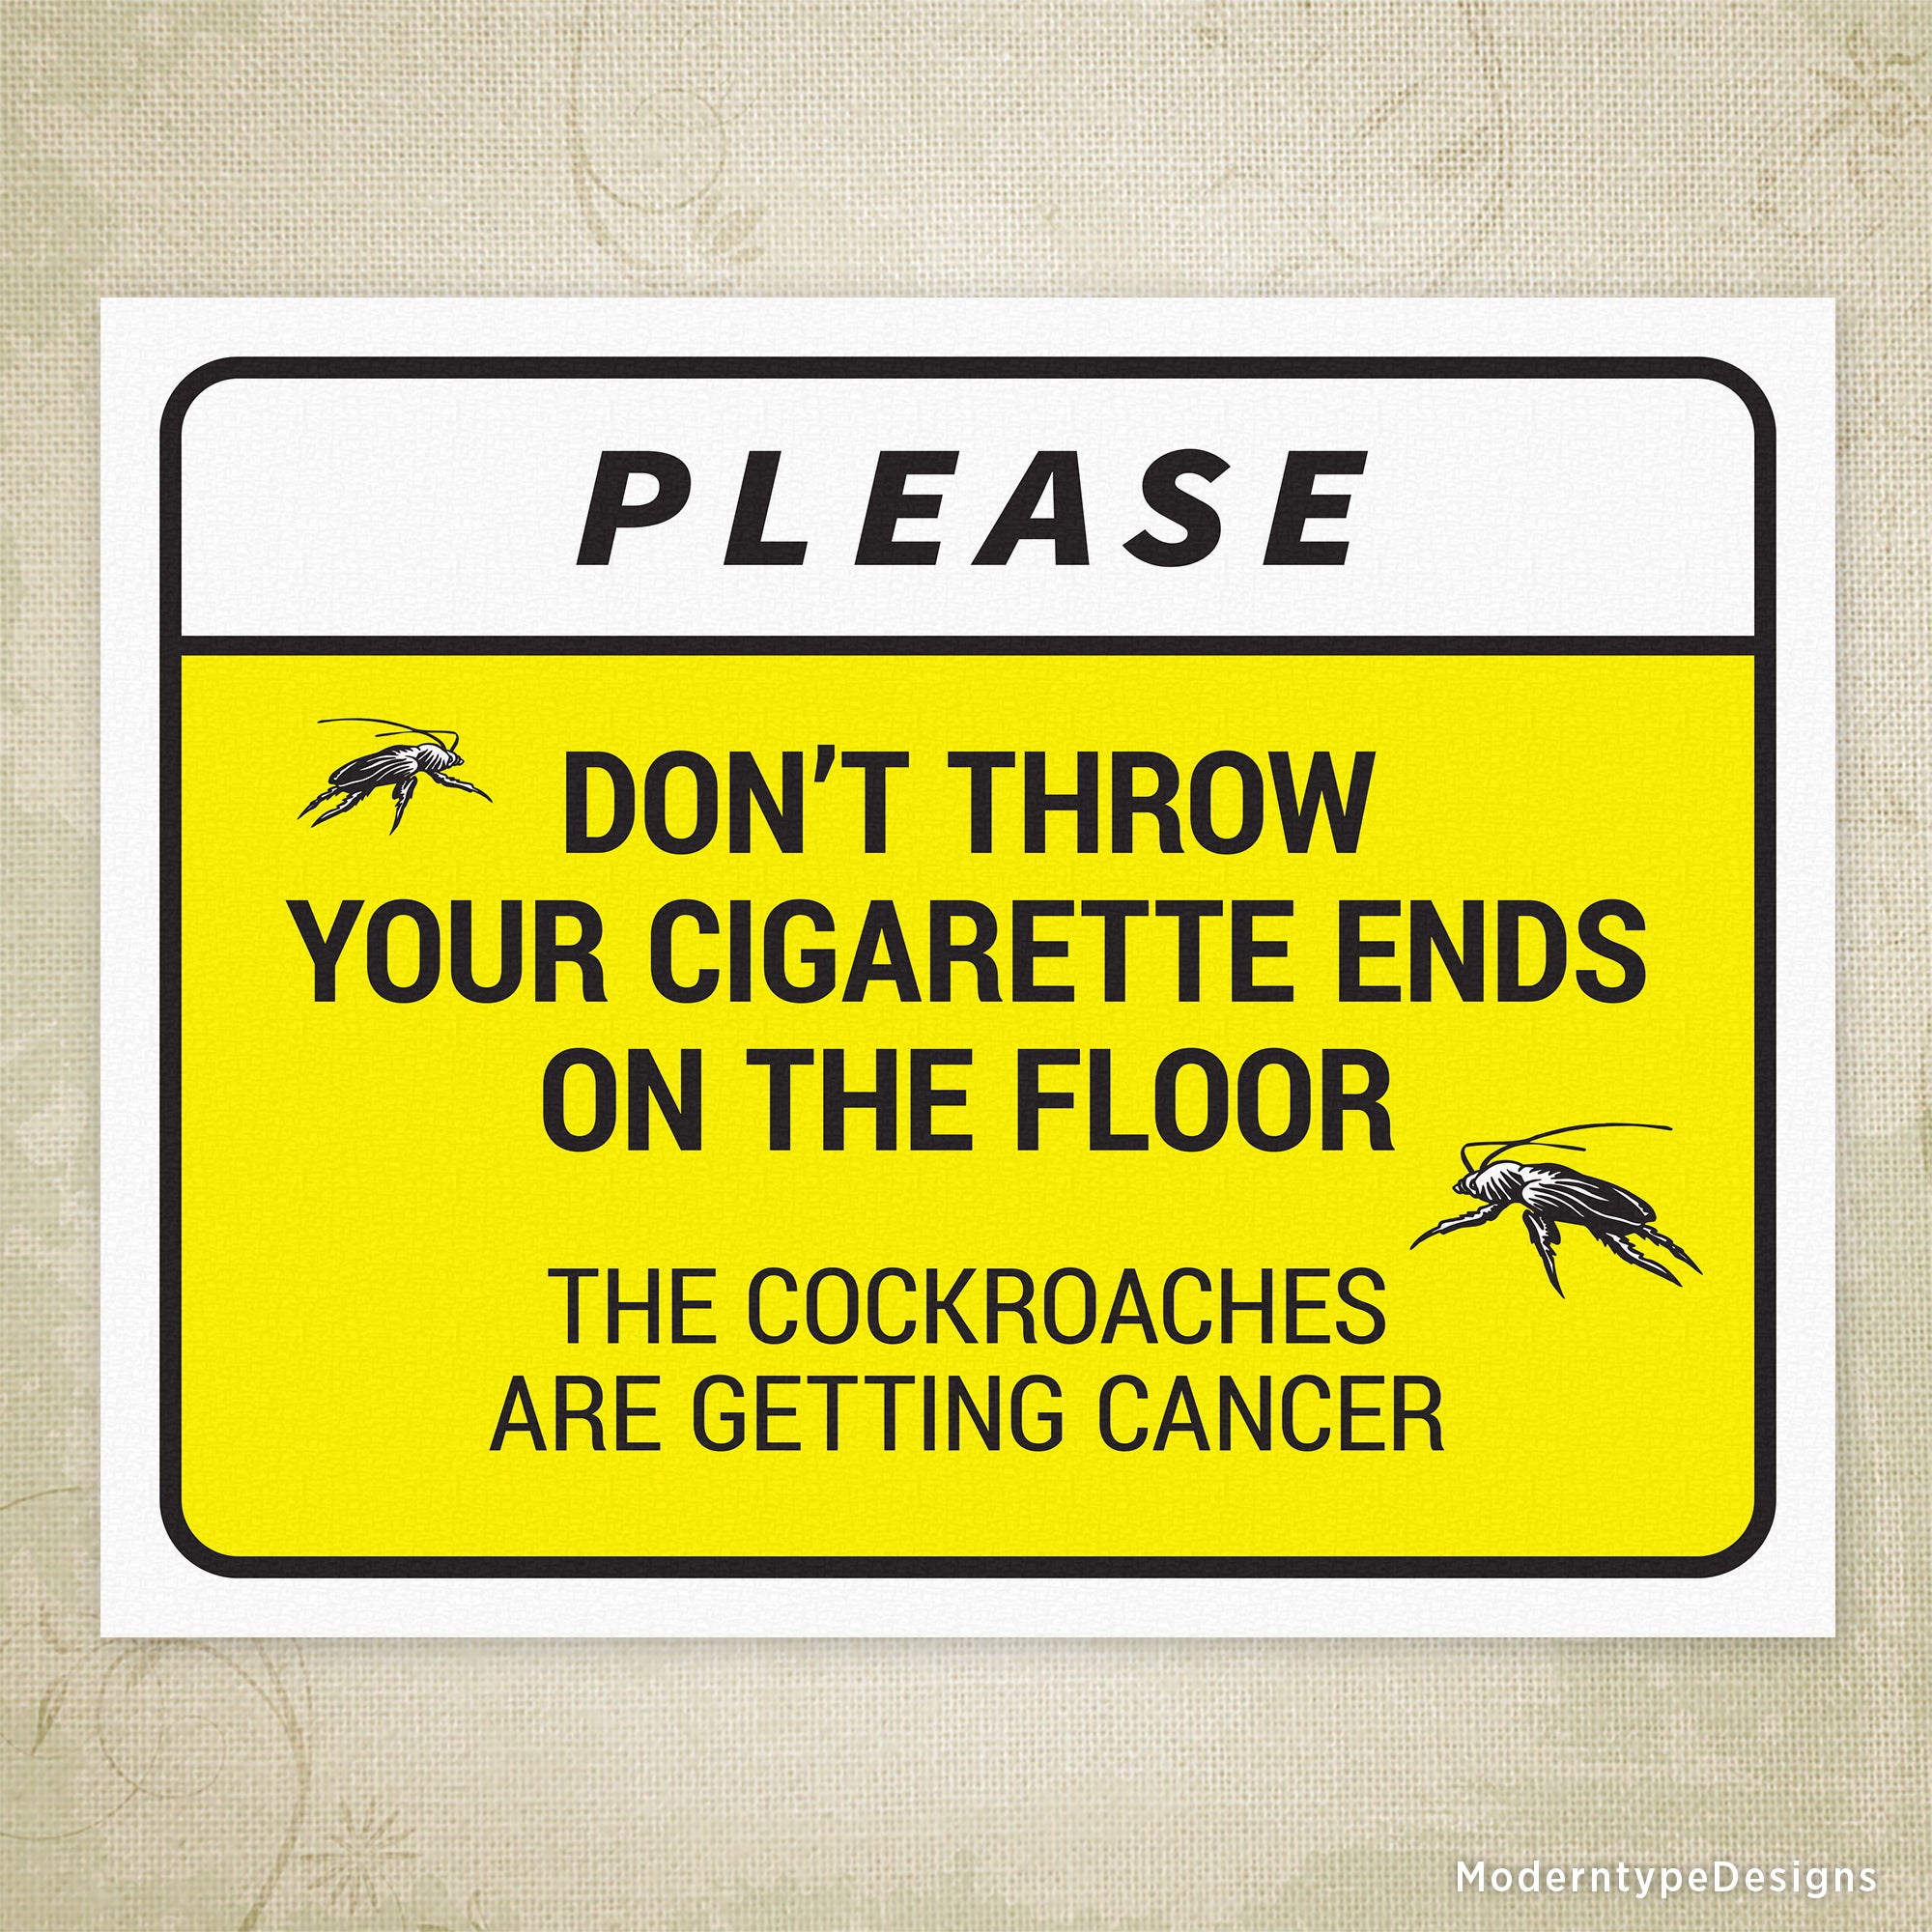 Cigarette Ends on Floor Cockroaches Getting Cancer Printable Sign